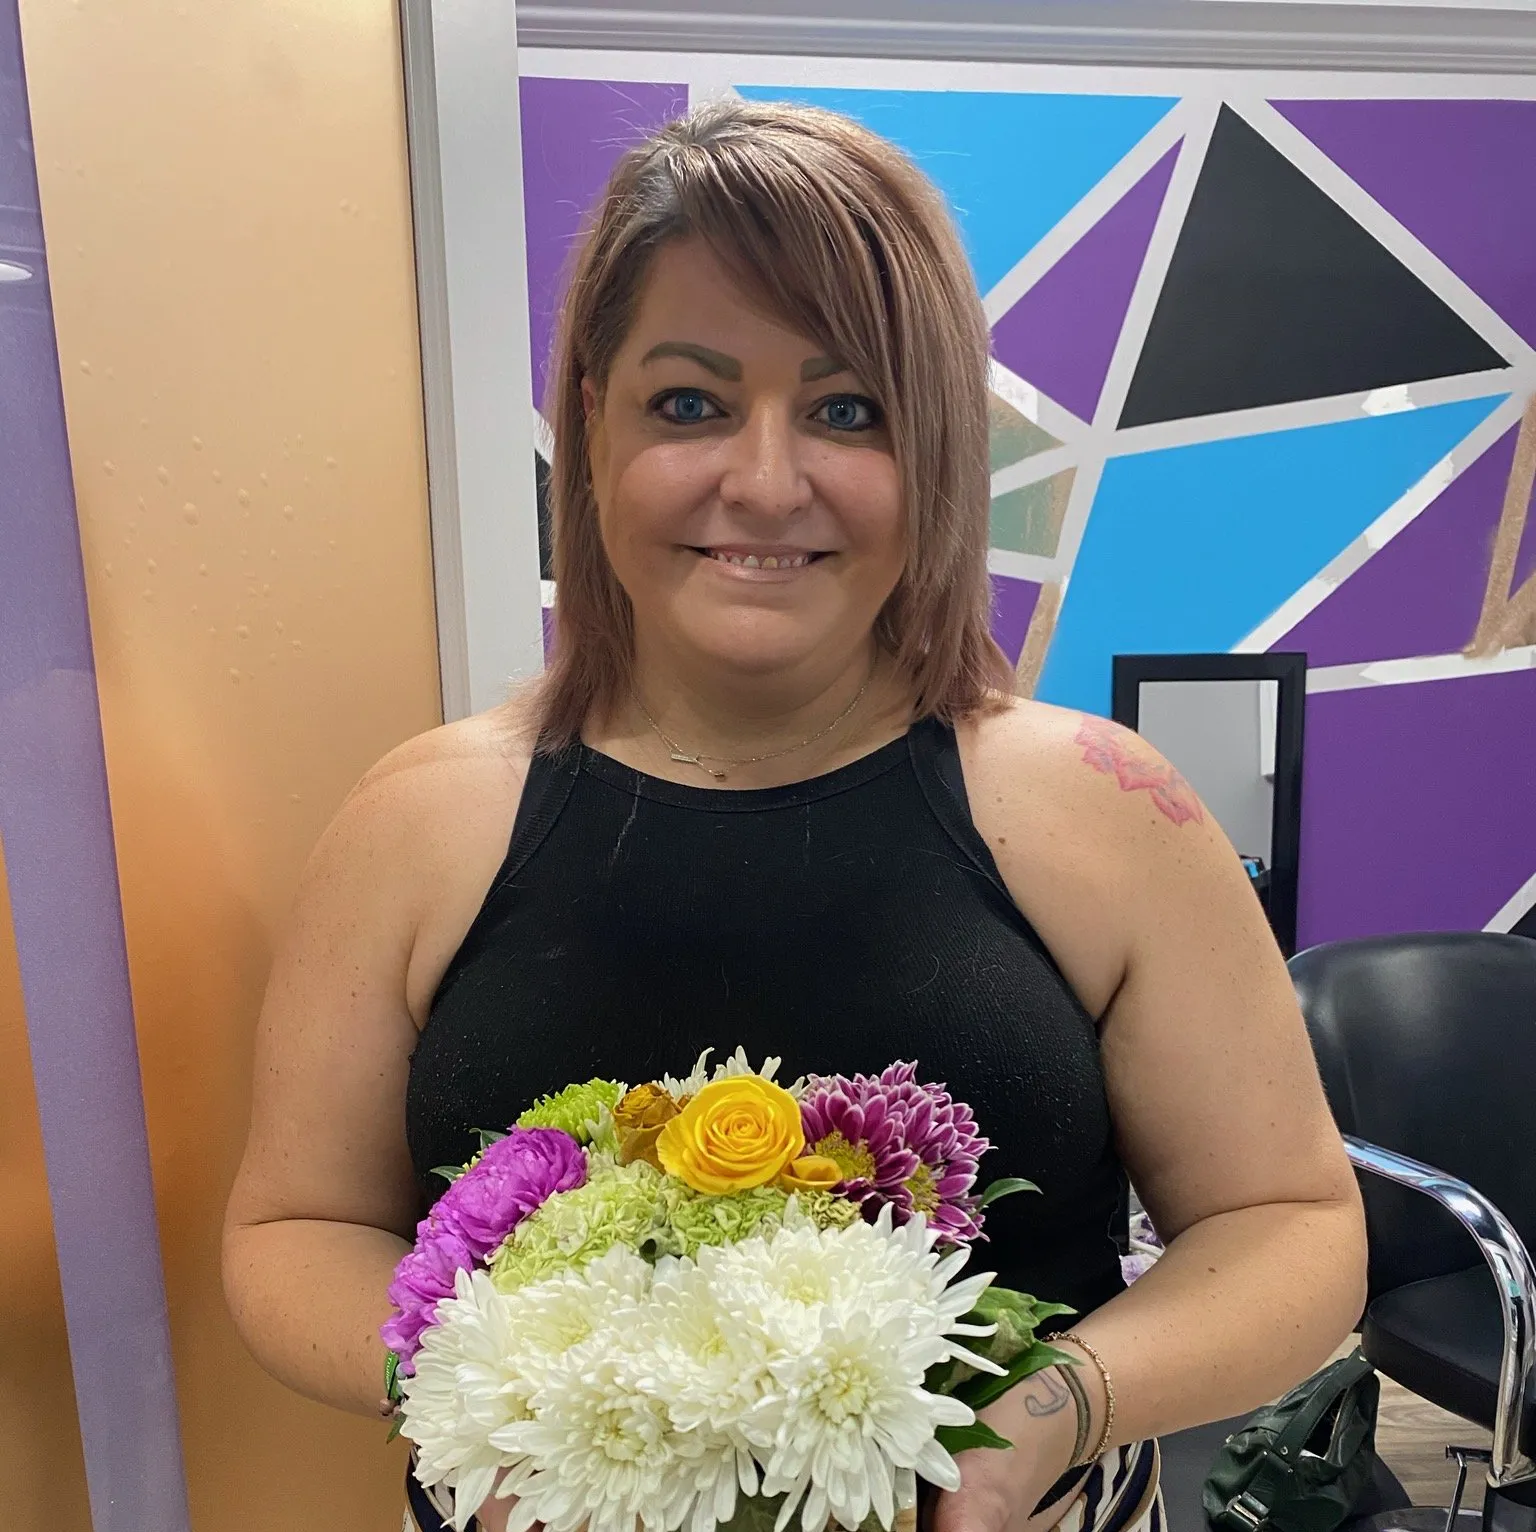 A woman in a black tank top is holding a bouquet of flowers.